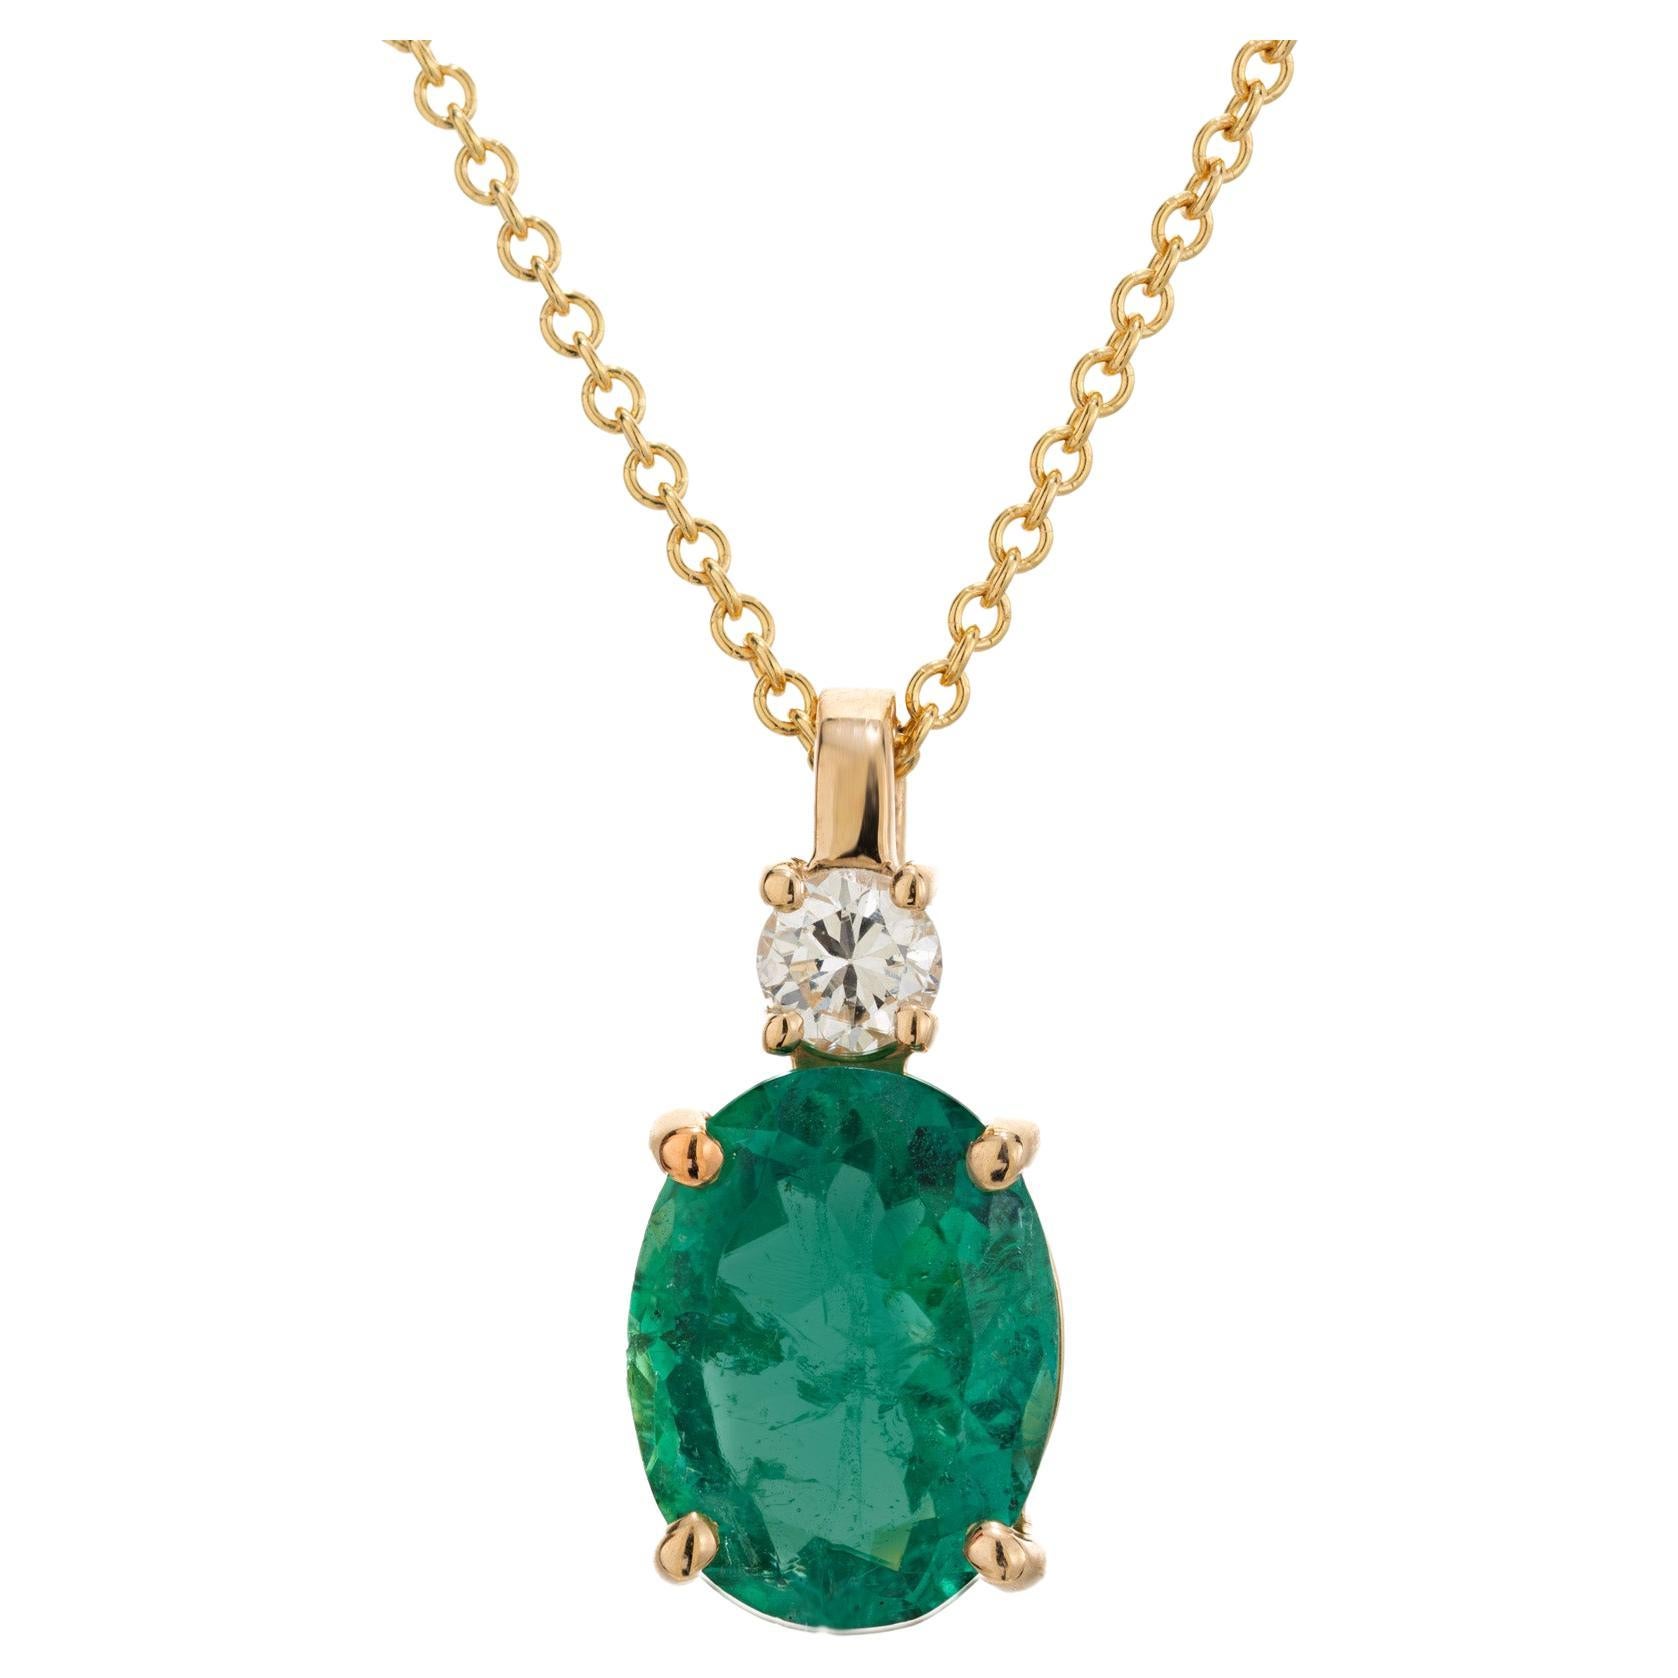 Peter Suchy GIA Certified Oval 2.63 Carat Emerald Diamond Gold Pendant Necklace For Sale